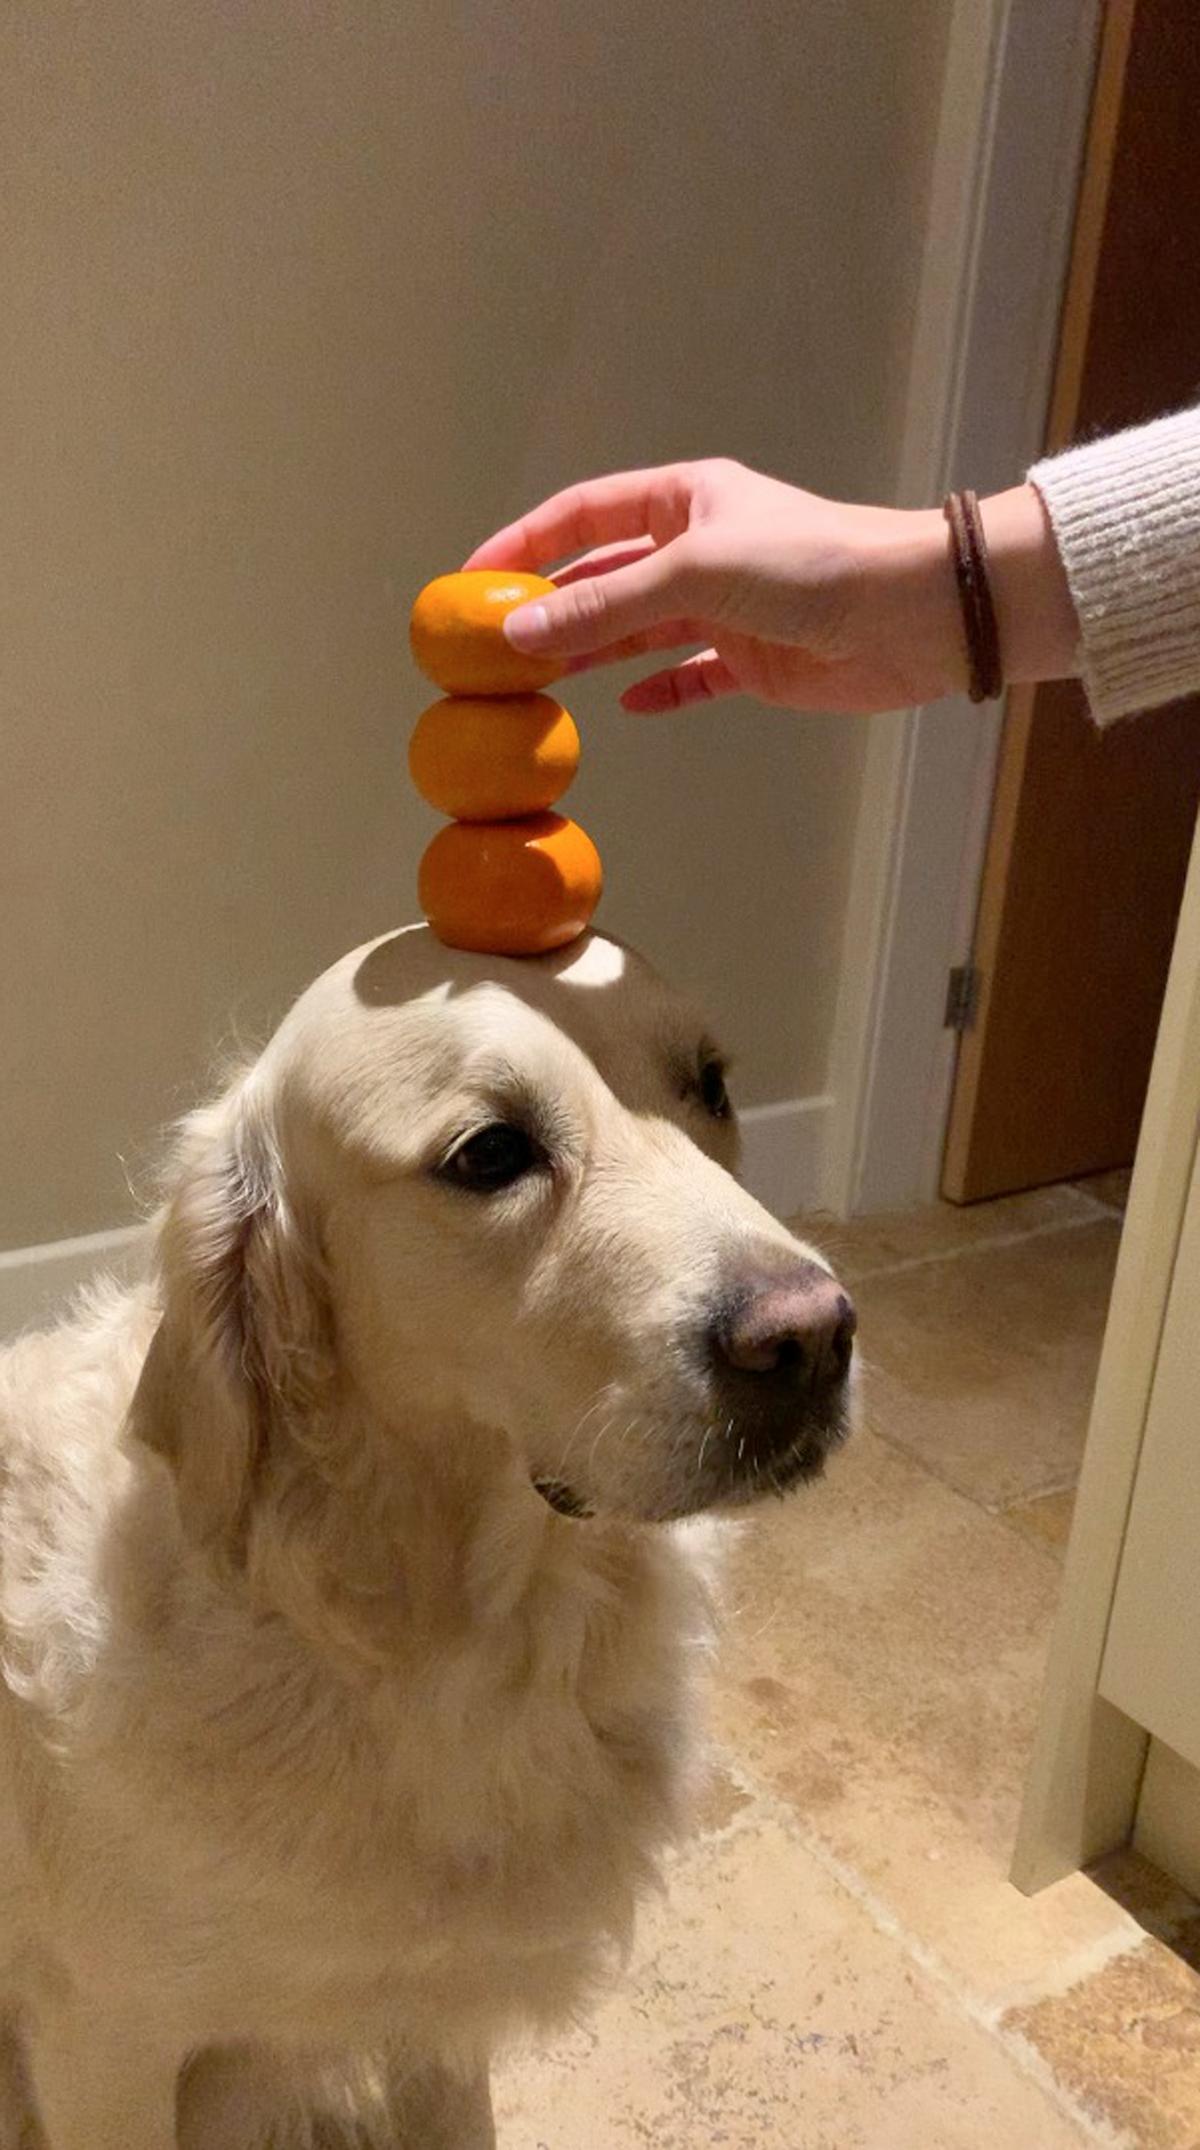 Dexter has three satsumas placed on his head.  (Courtesy of Caters News)